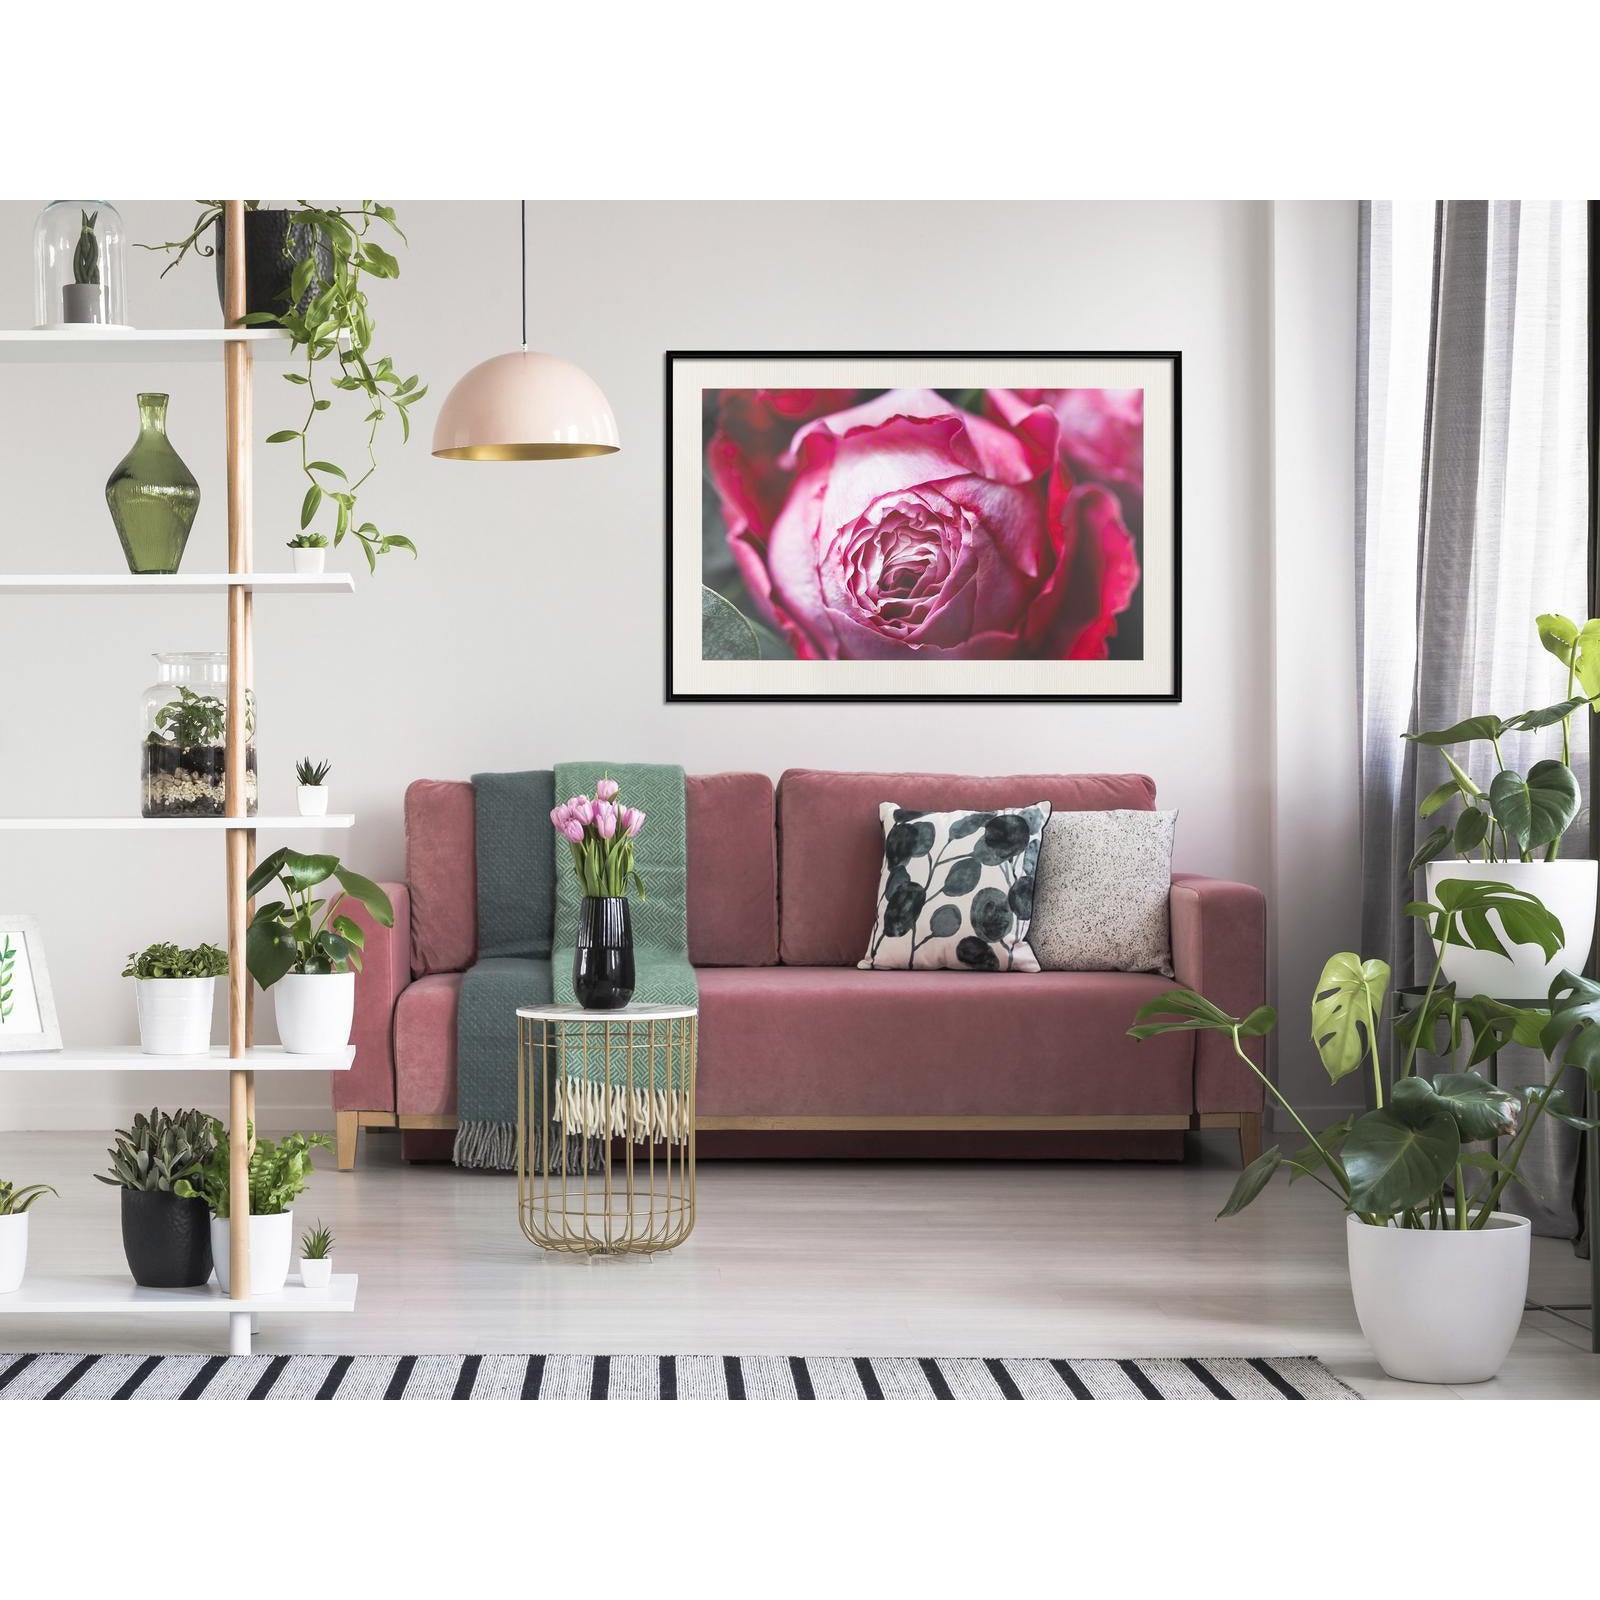 Inramad Poster / Tavla - Blooming Rose-Poster Inramad-Artgeist-peaceofhome.se